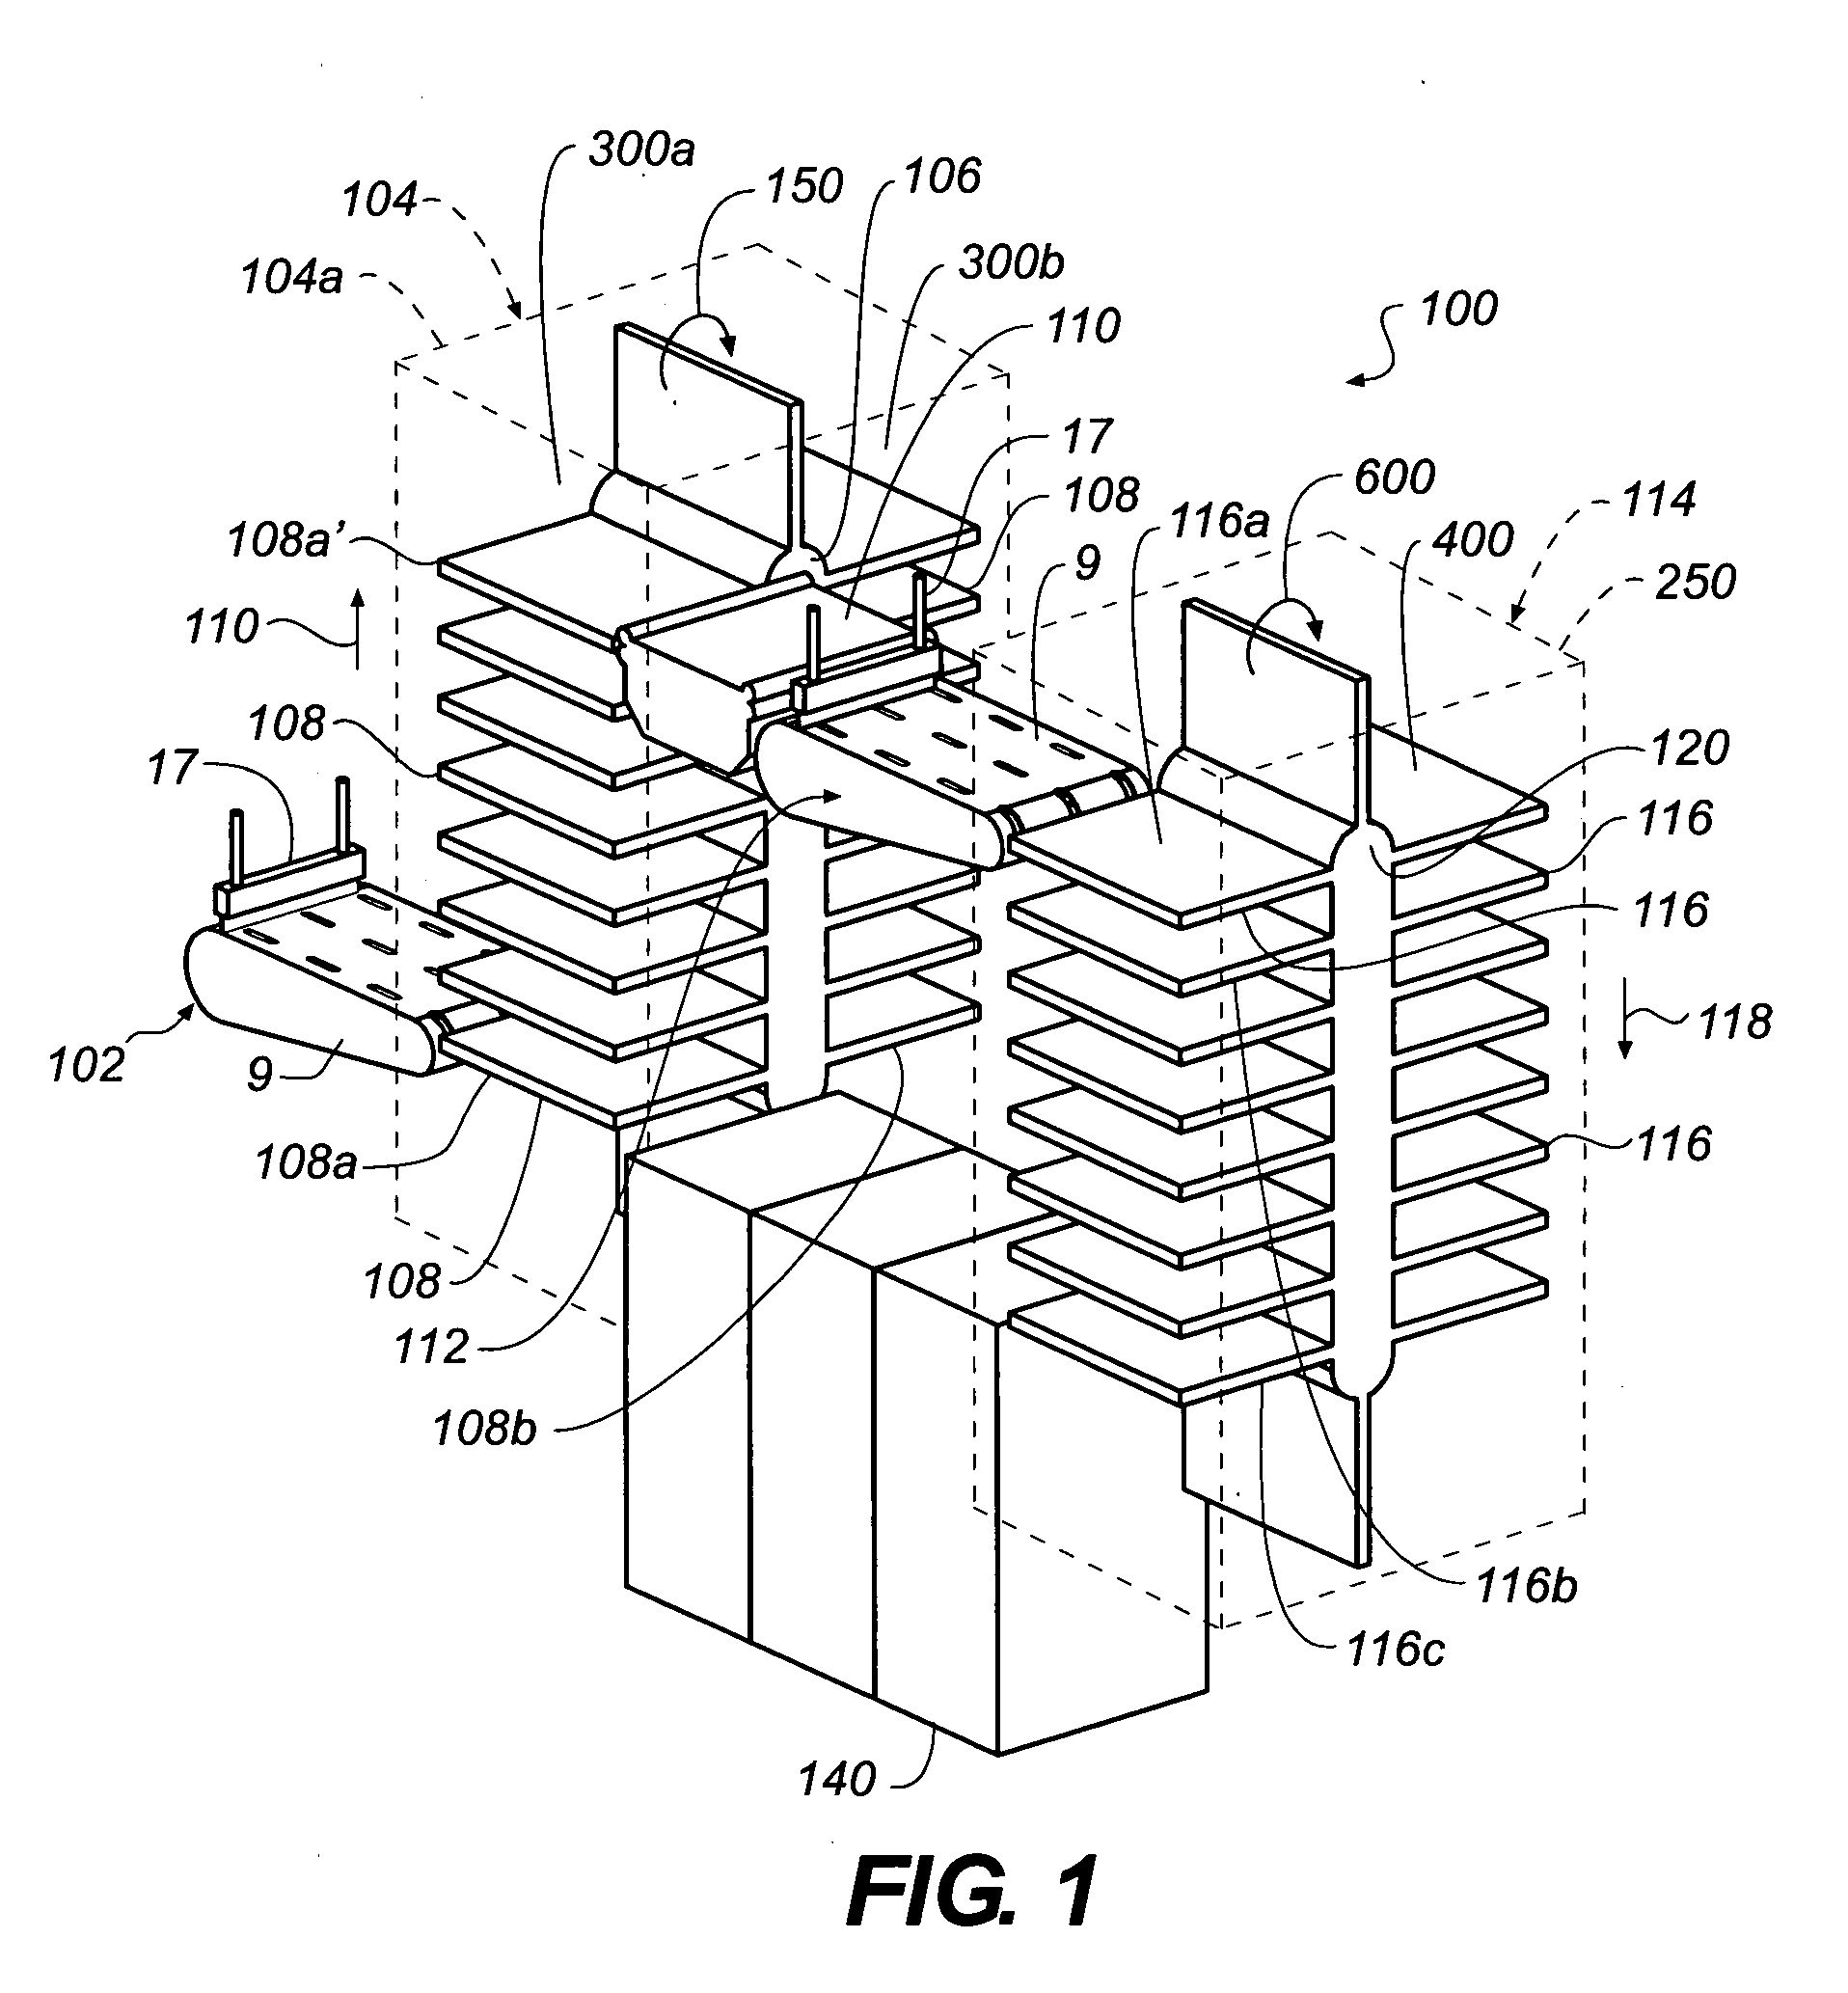 Photographic processing system having a vertical stacker arrangement